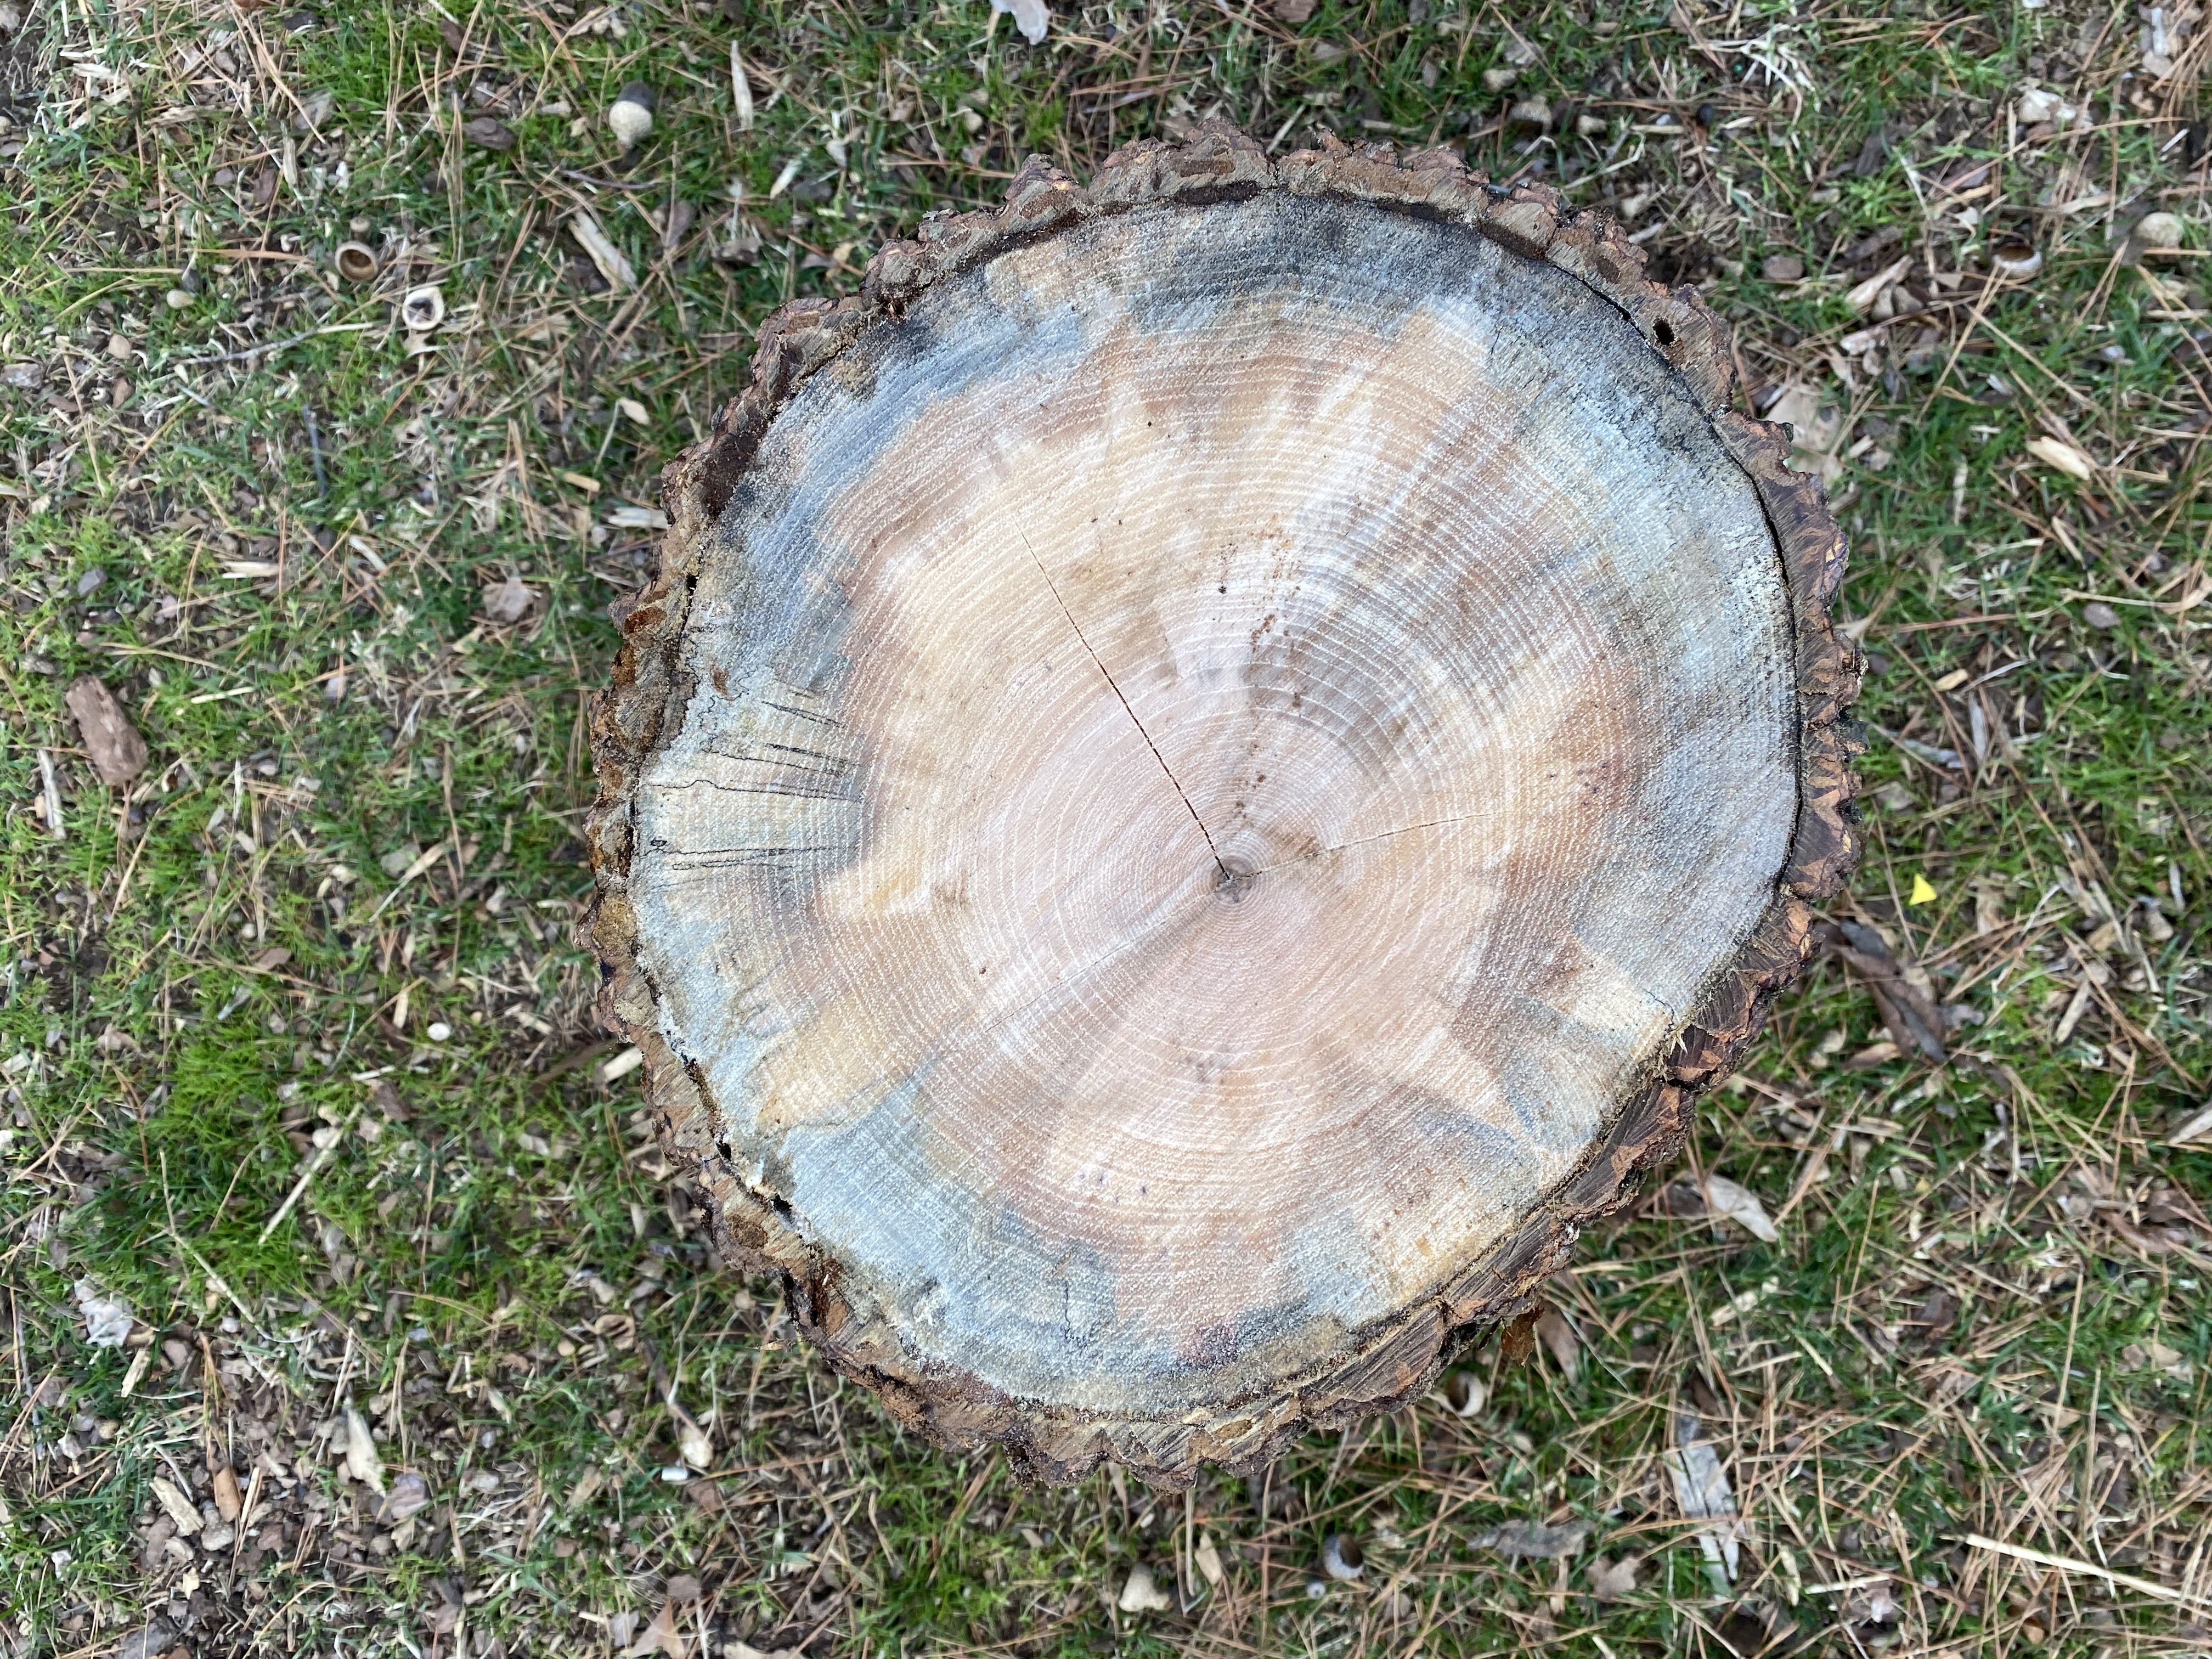 Wood ID please? Is this Hickory?